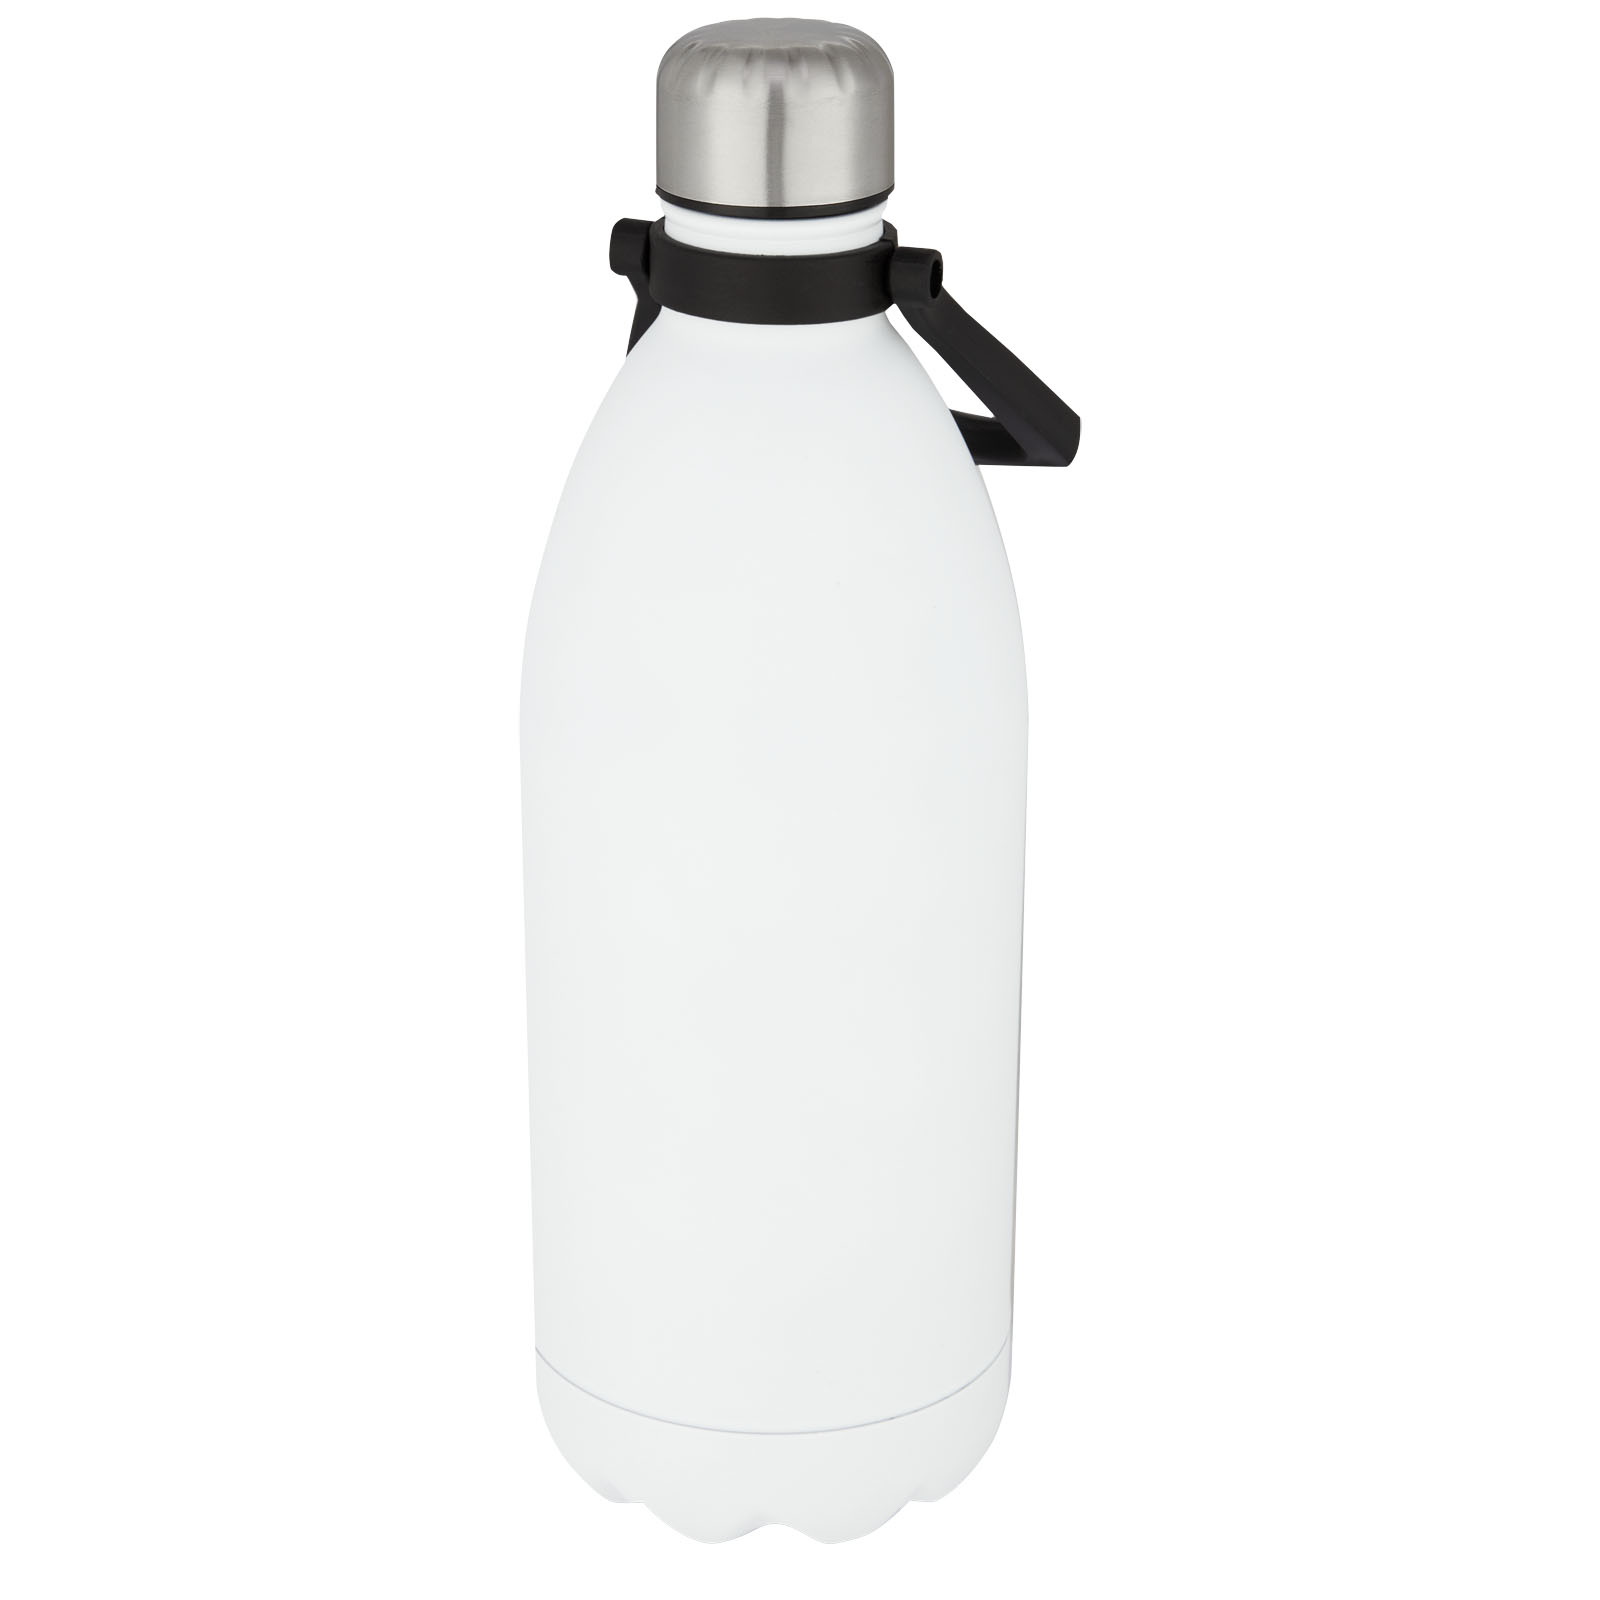 Advertising Insulated mugs - Cove 1.5 L vacuum insulated stainless steel bottle - 0